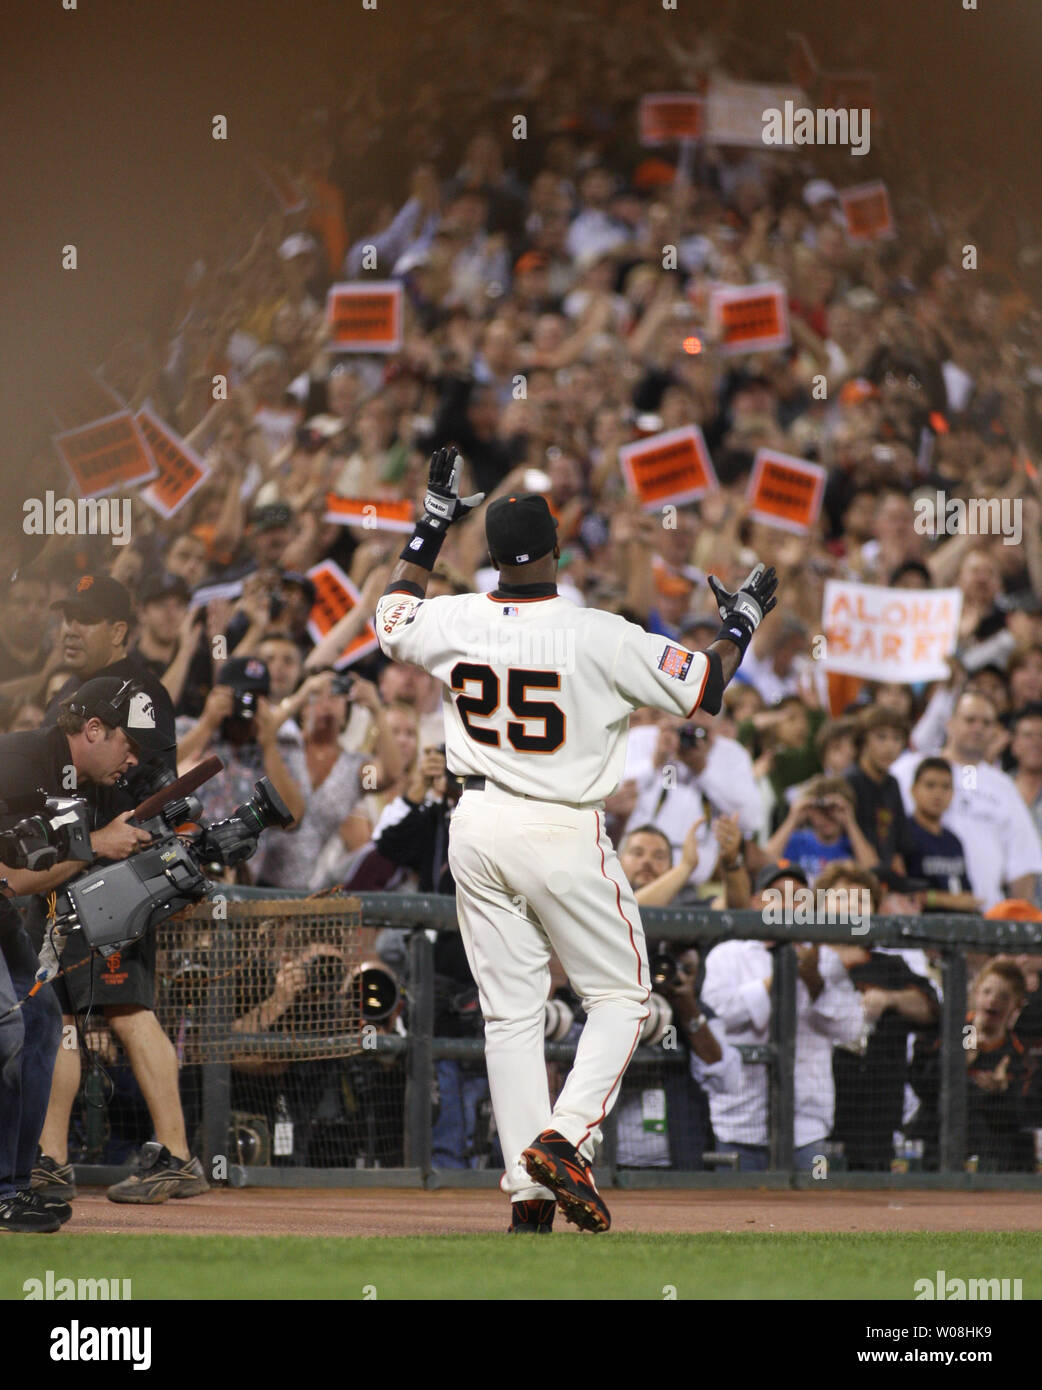 Curtain call at AT&T for Barry Bonds as Giants retire No. 25